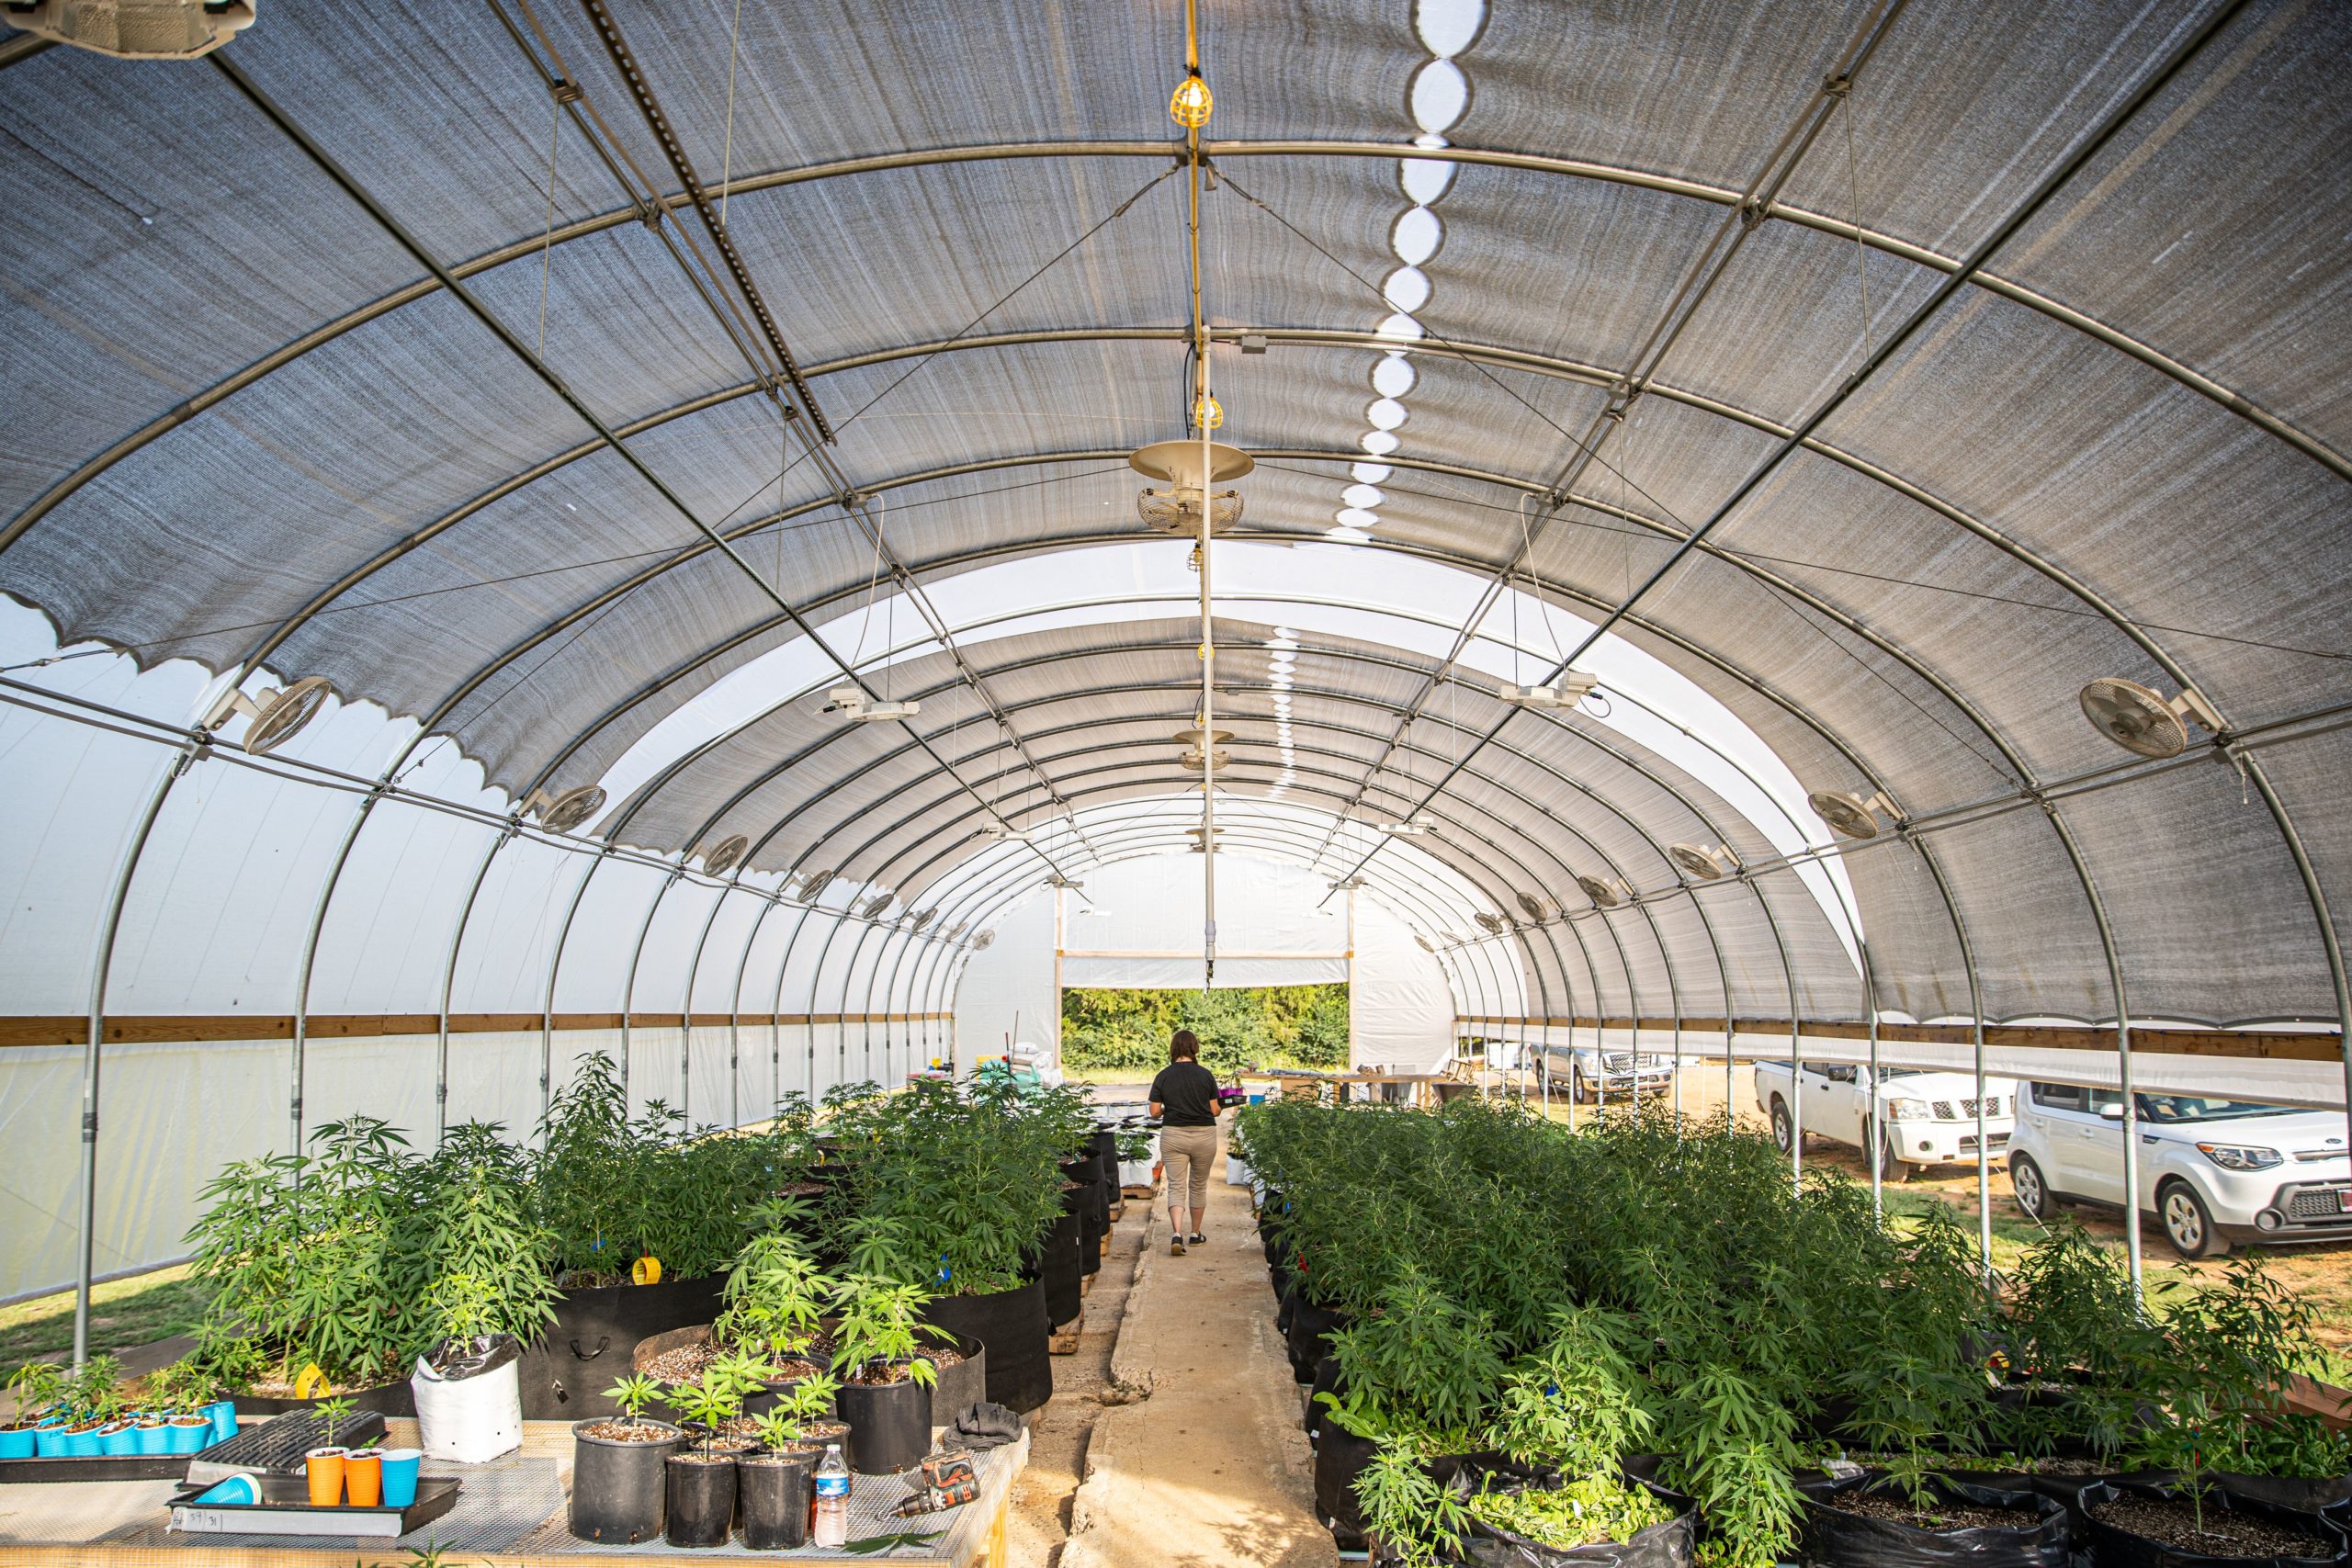 Hoop house with hemp crops and NXT-LP luminaires